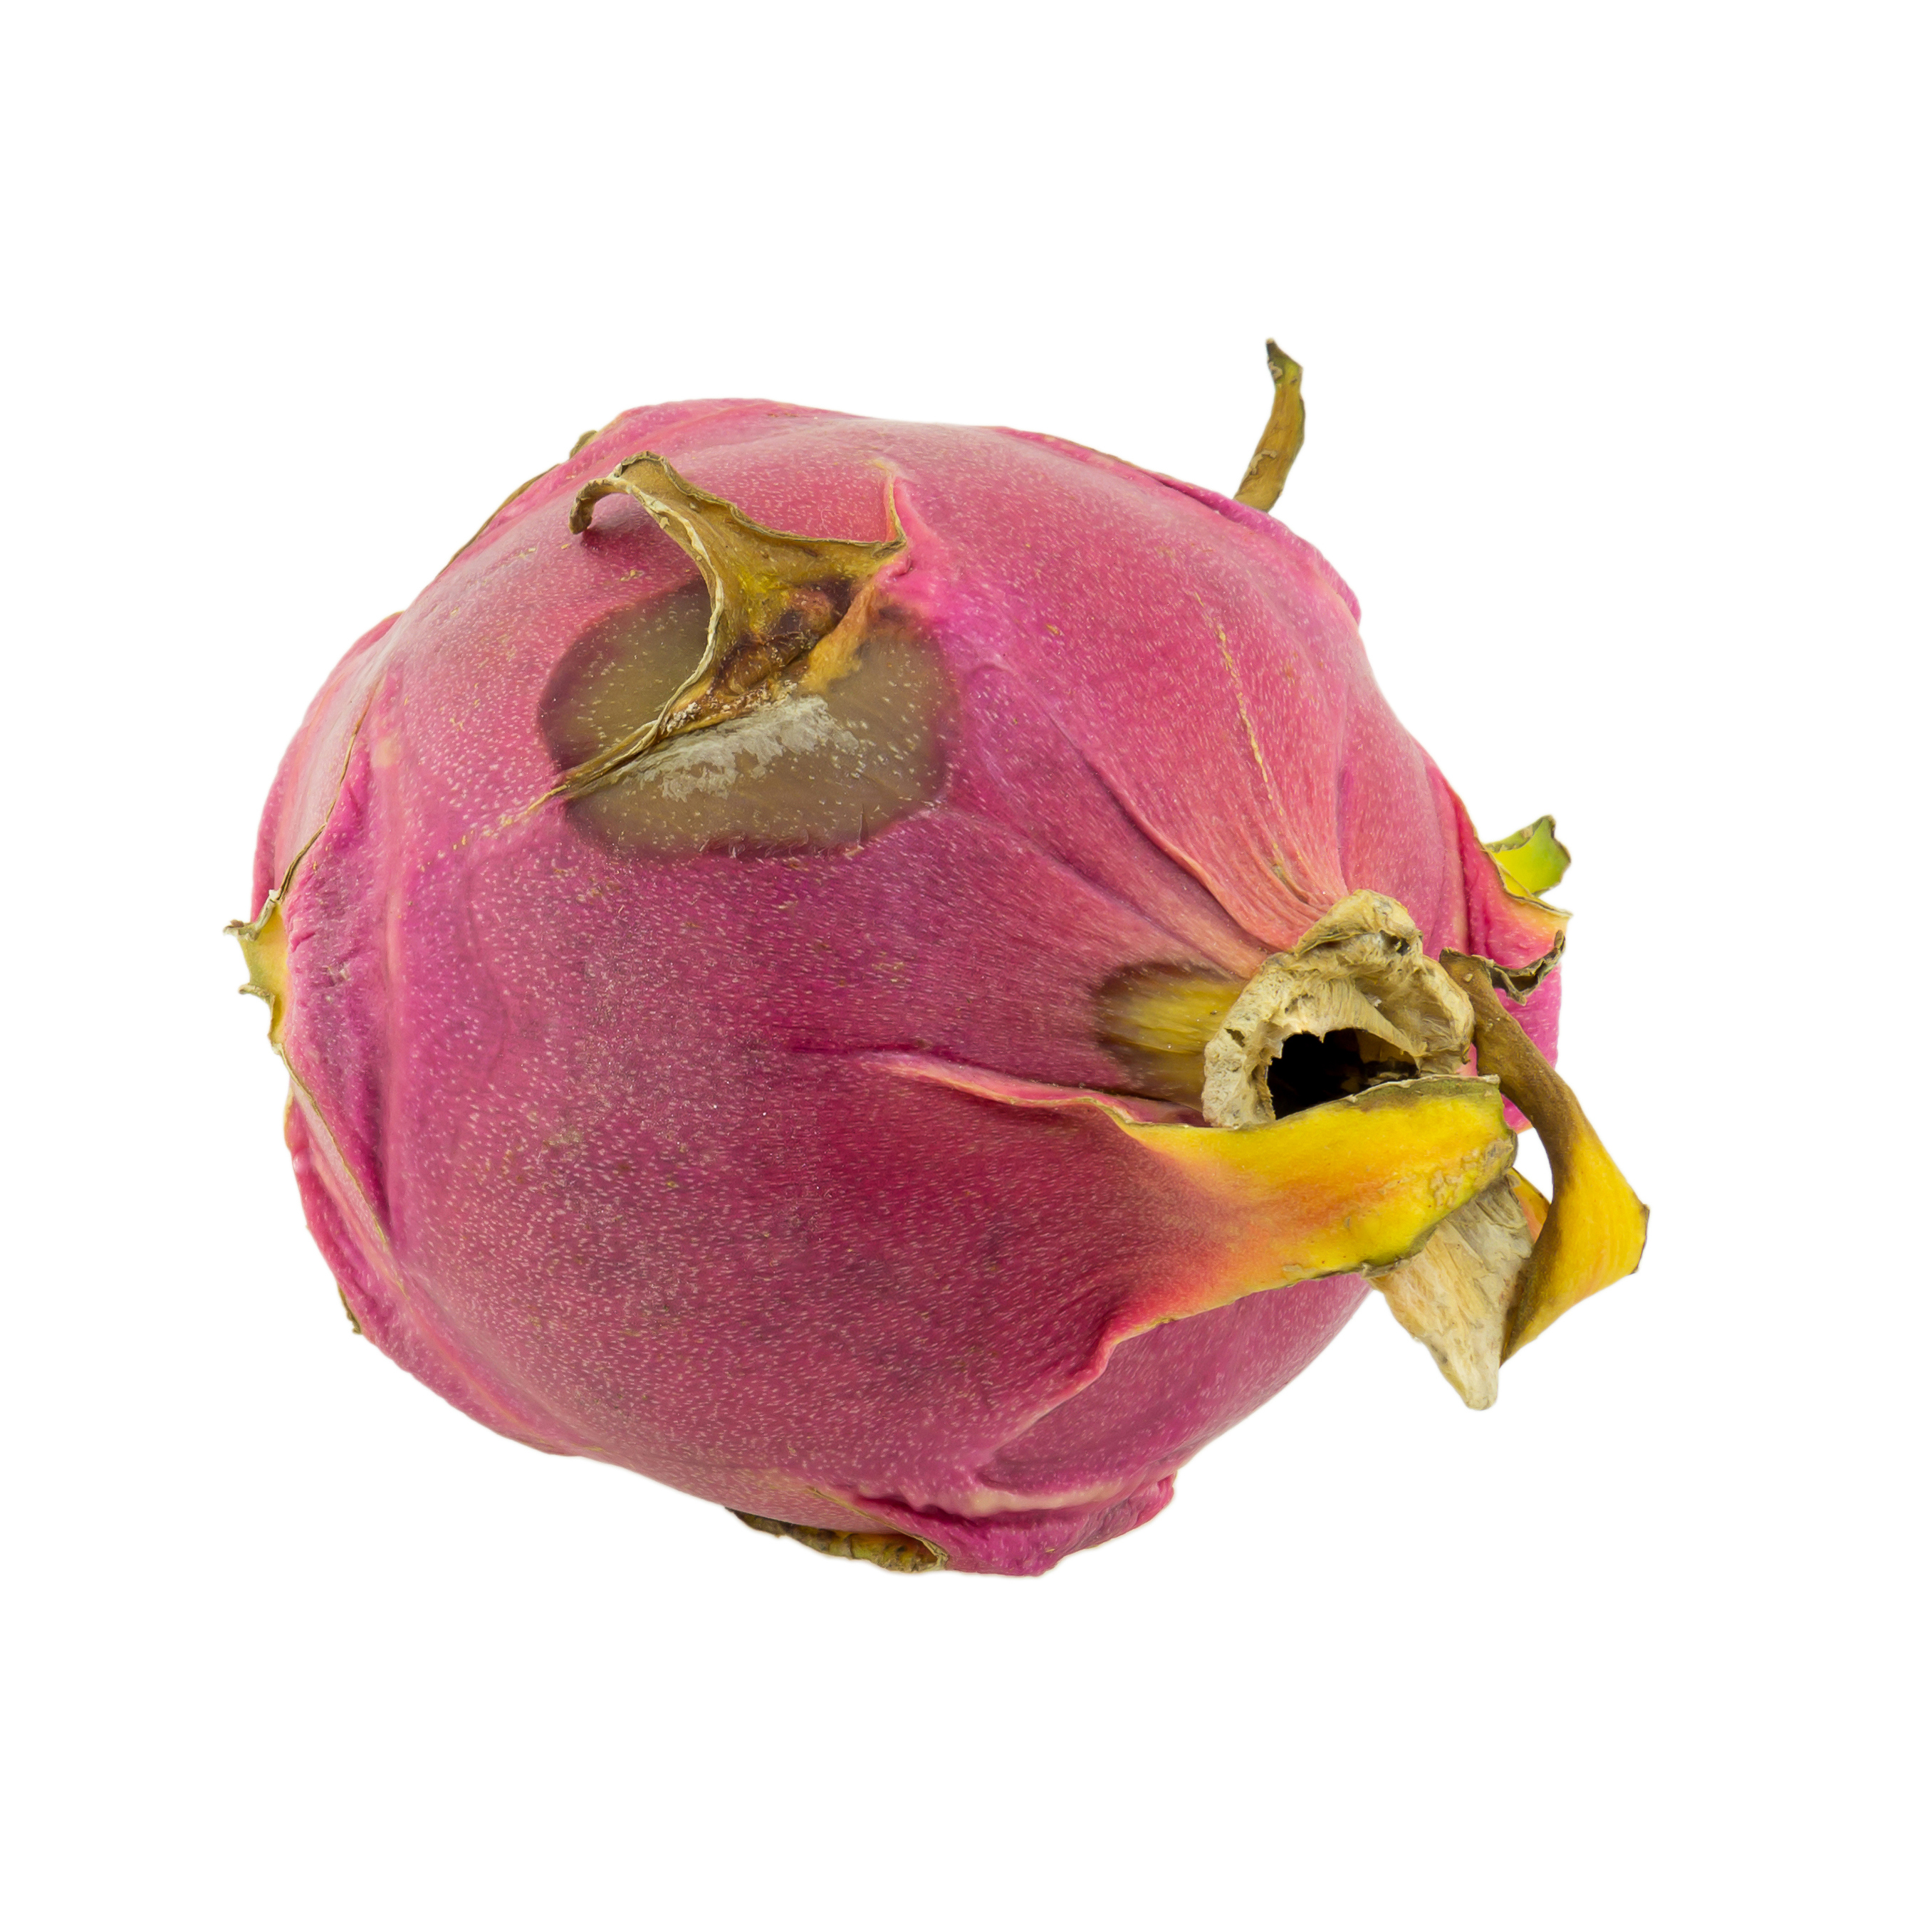 If a dragon fruit has brown spots or bruises, it may be starting to spoil. | Source: Getty Images